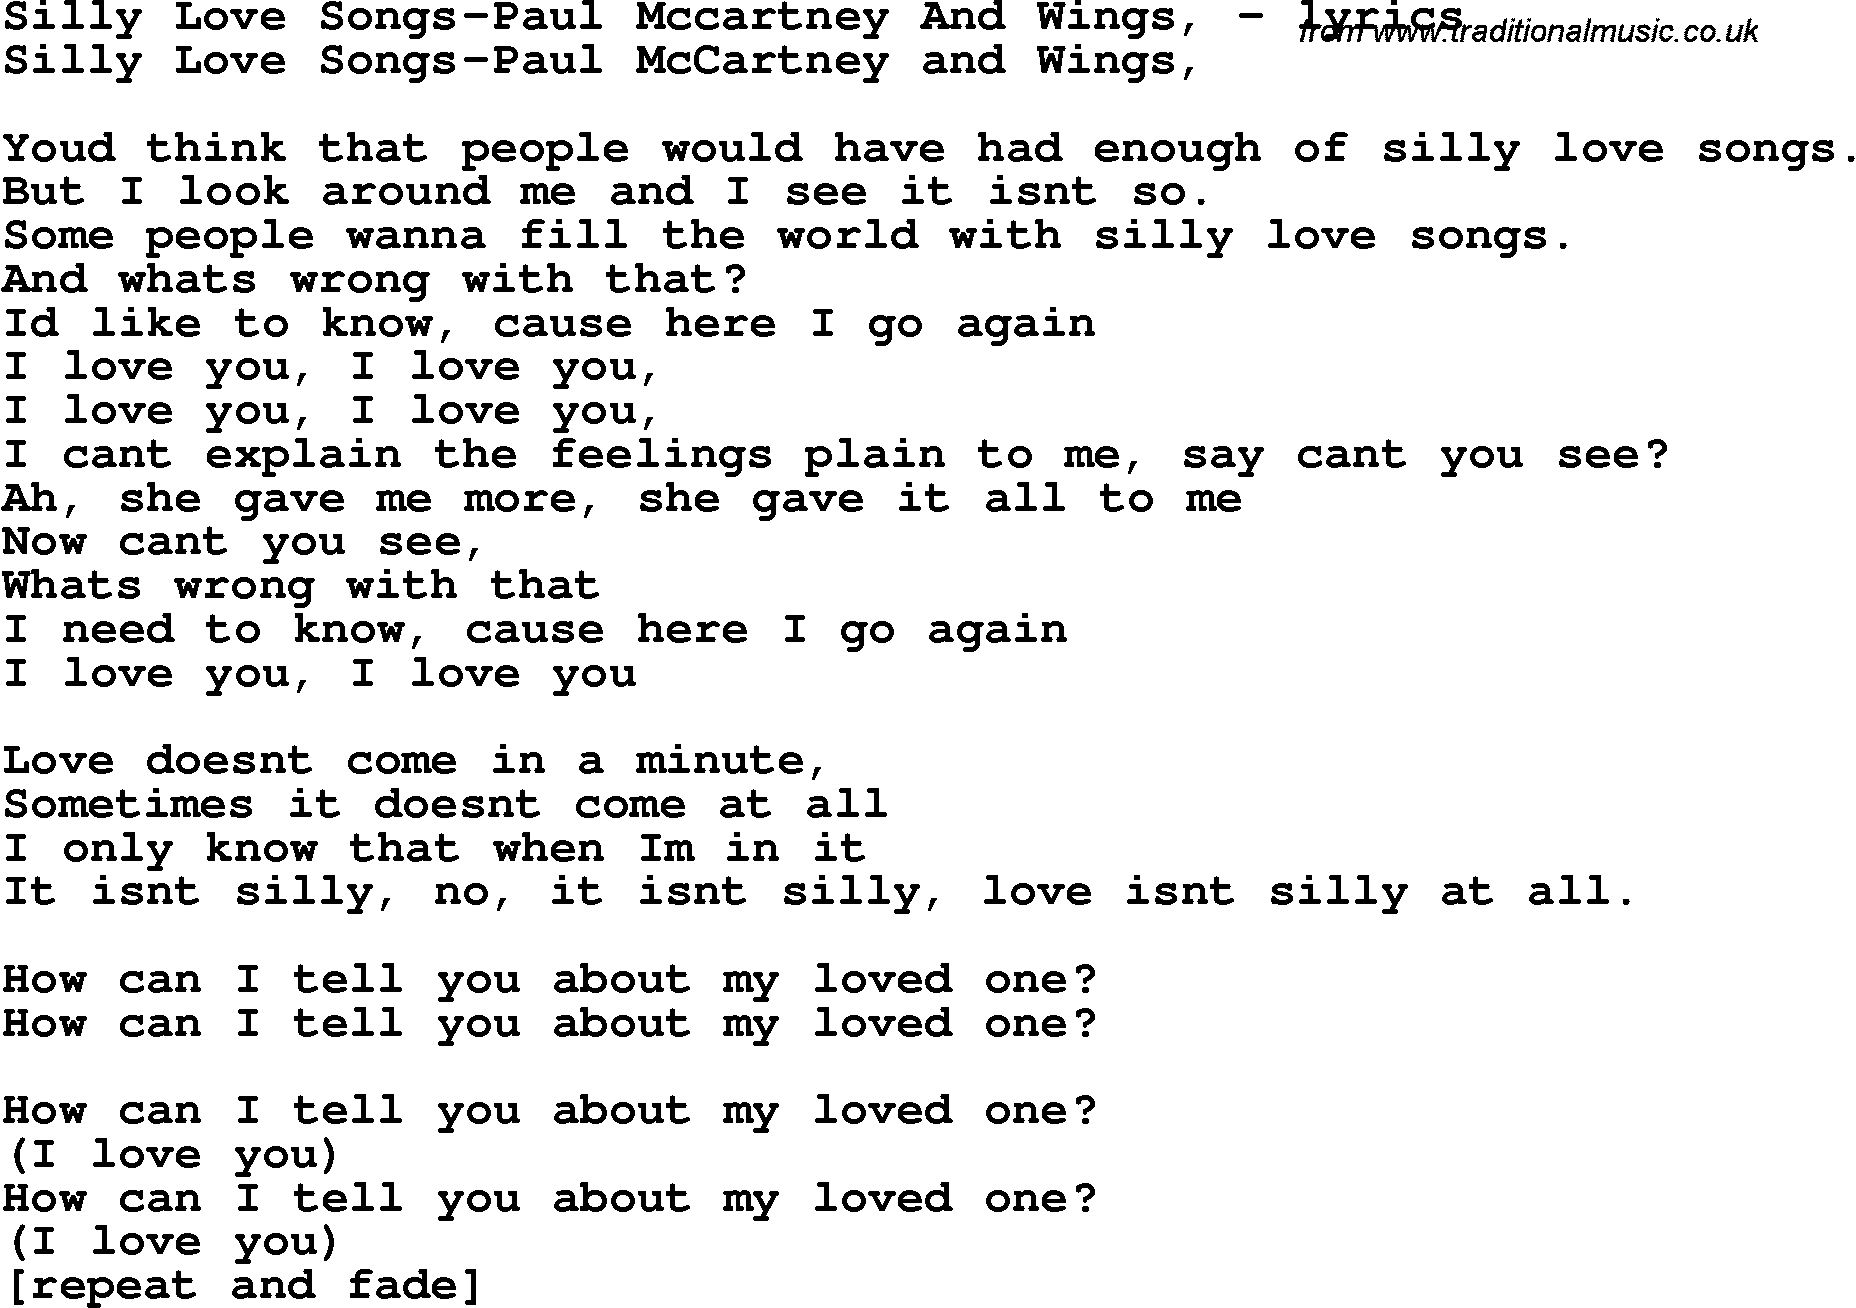 Love Song Lyrics for: Silly Love Songs-Paul Mccartney And Wings,